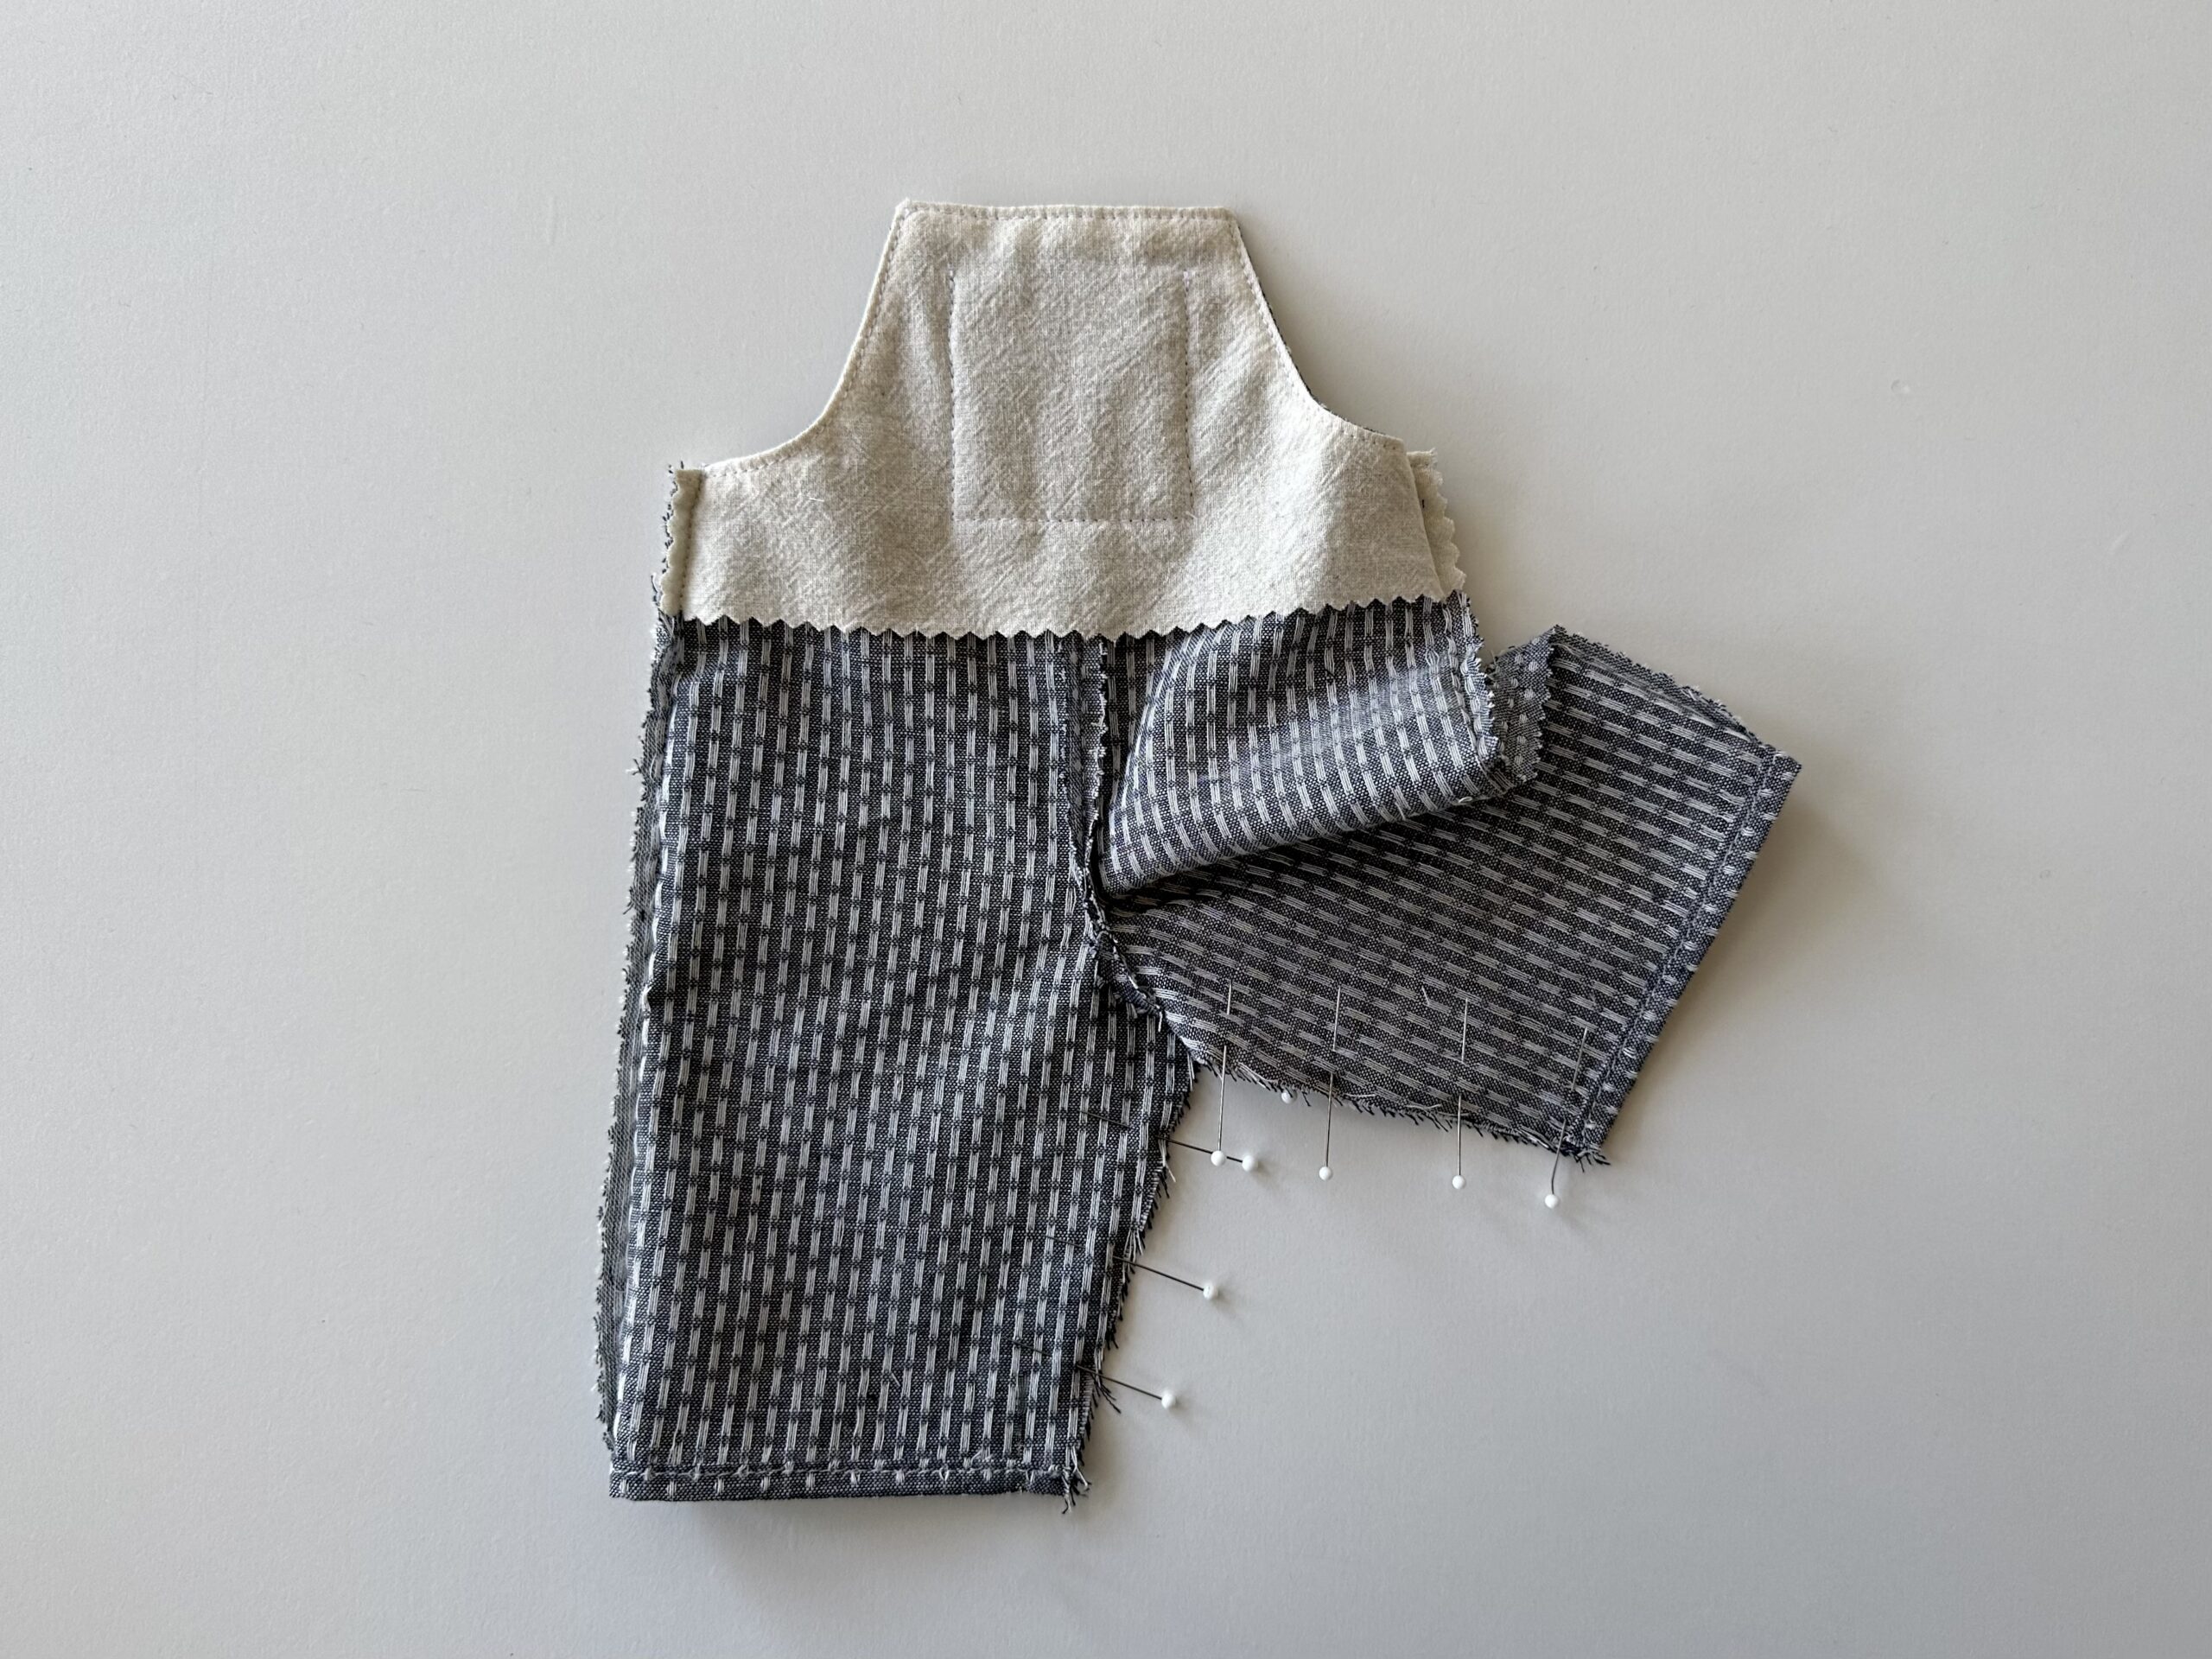 image of doll-sized overalls on a white table with the inseam pinned